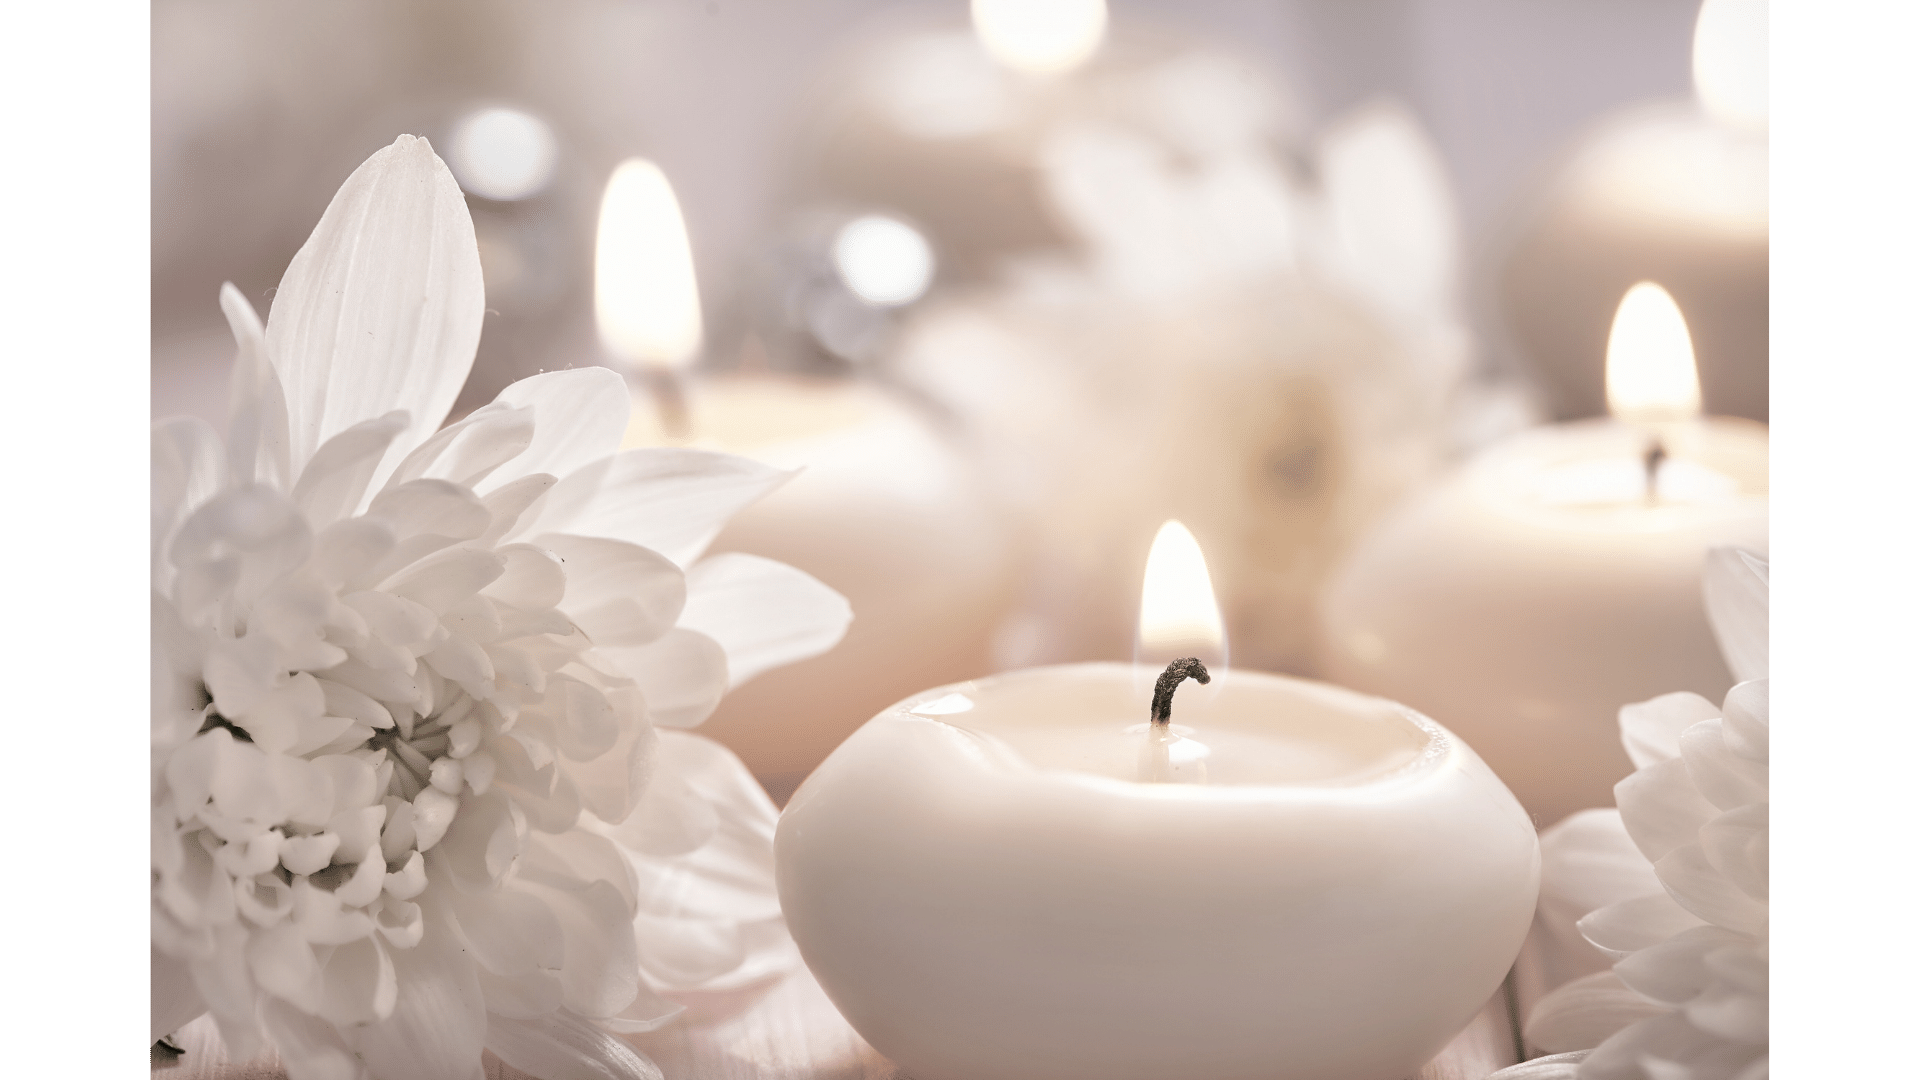 Aromatherapy candles surrounded by white flowers, promoting relaxation and tranquility.